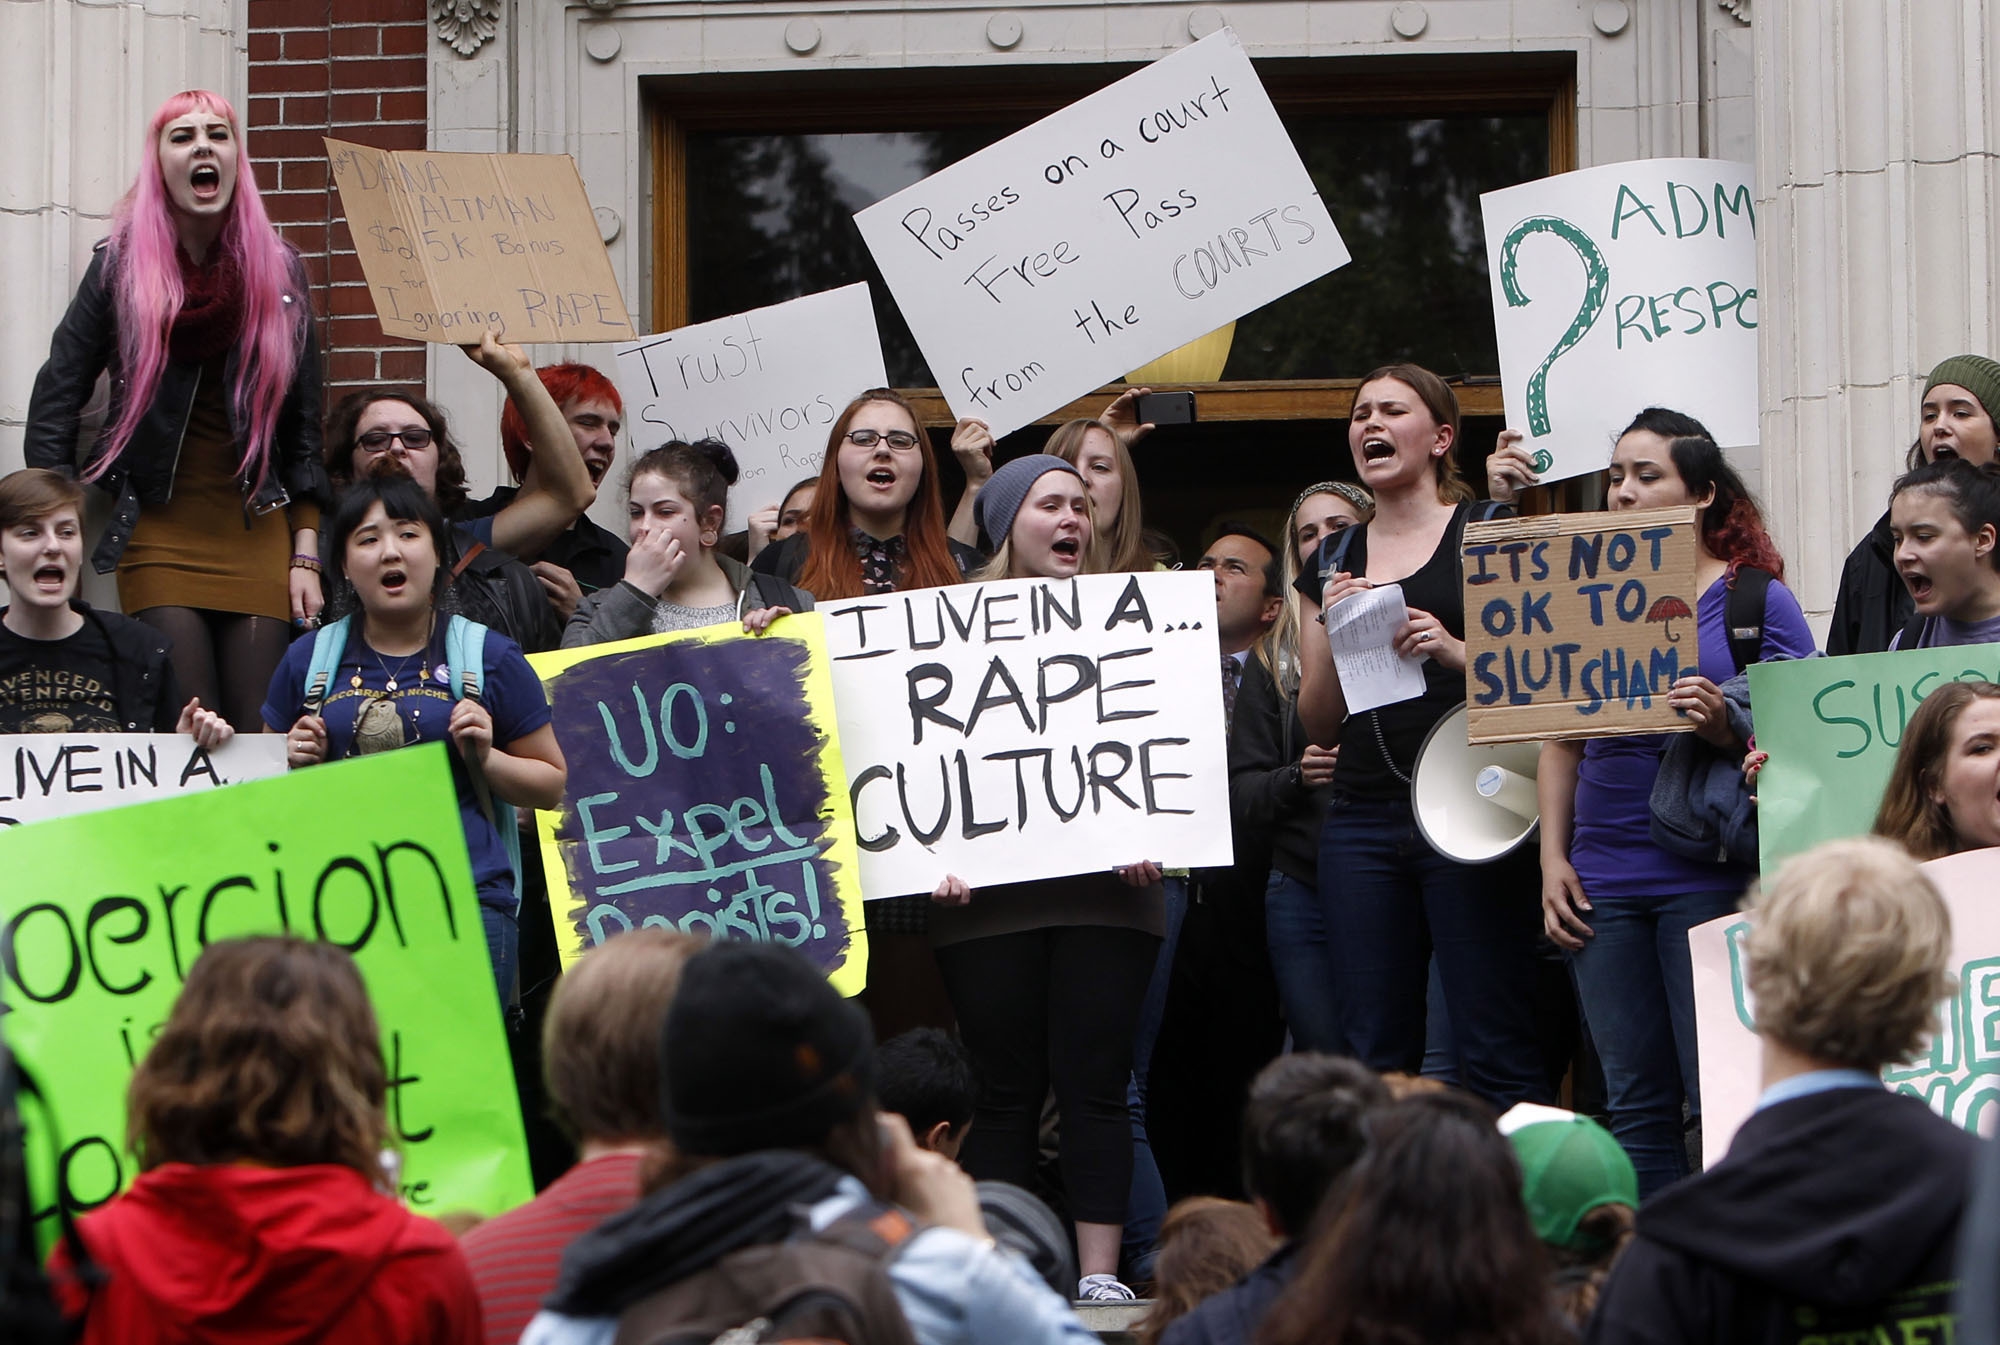 Campus Sex Assault Rules Fall Short Prompting Overhaul Call Wtop News 8242